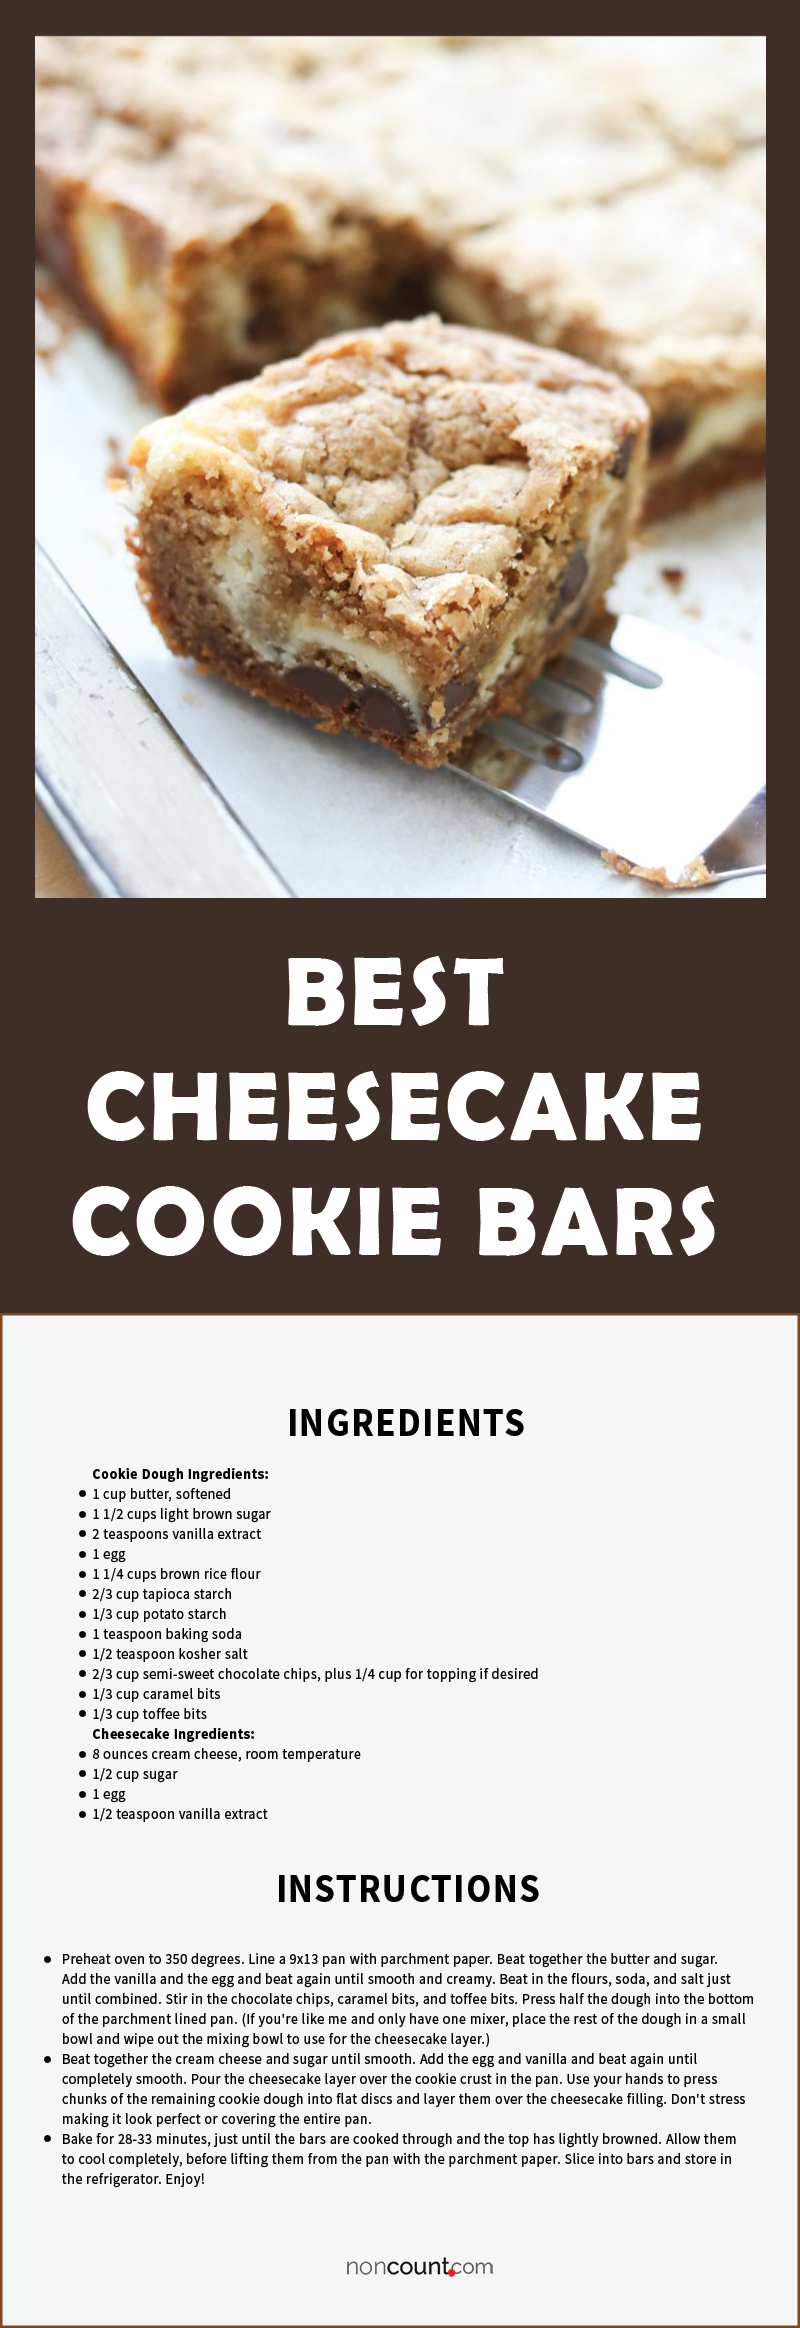 The Best Cheesecake Cookie Bars {traditional and gluten free recipes} details image